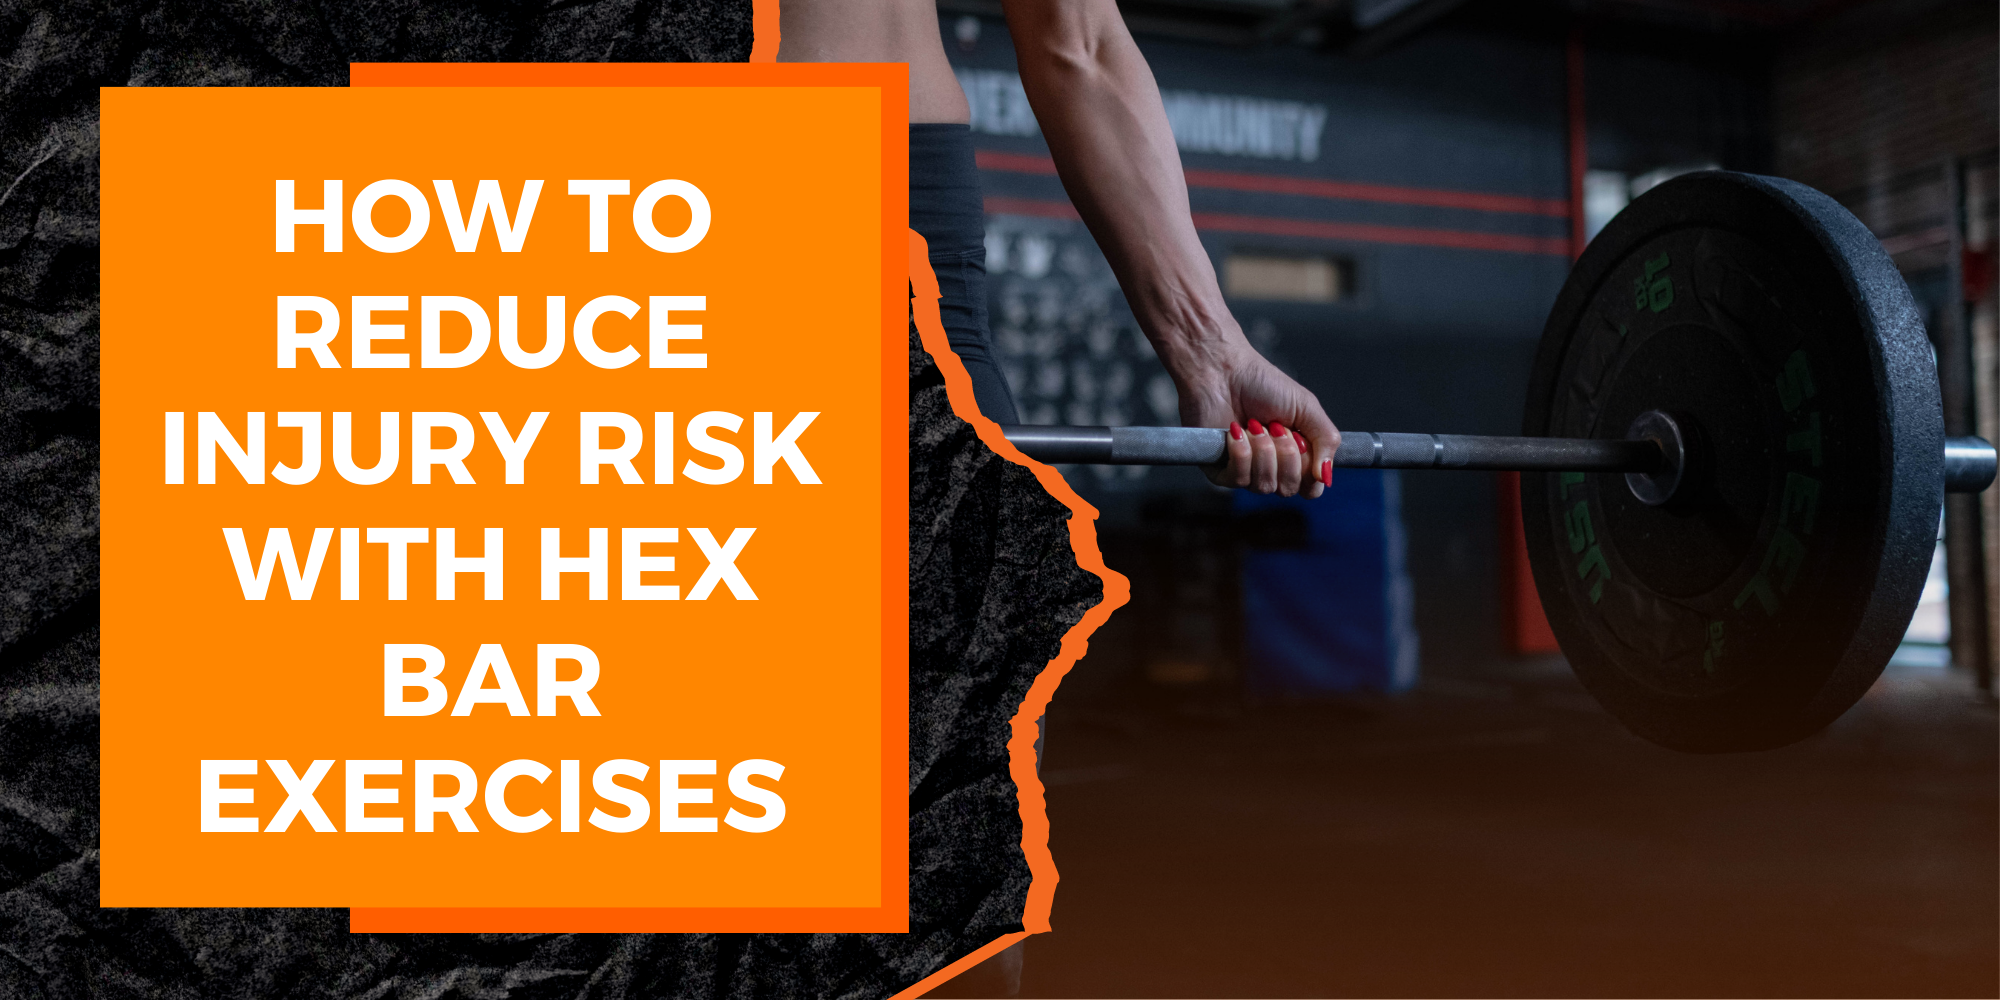 How to Reduce Injury Risk With Hex Bar Exercises